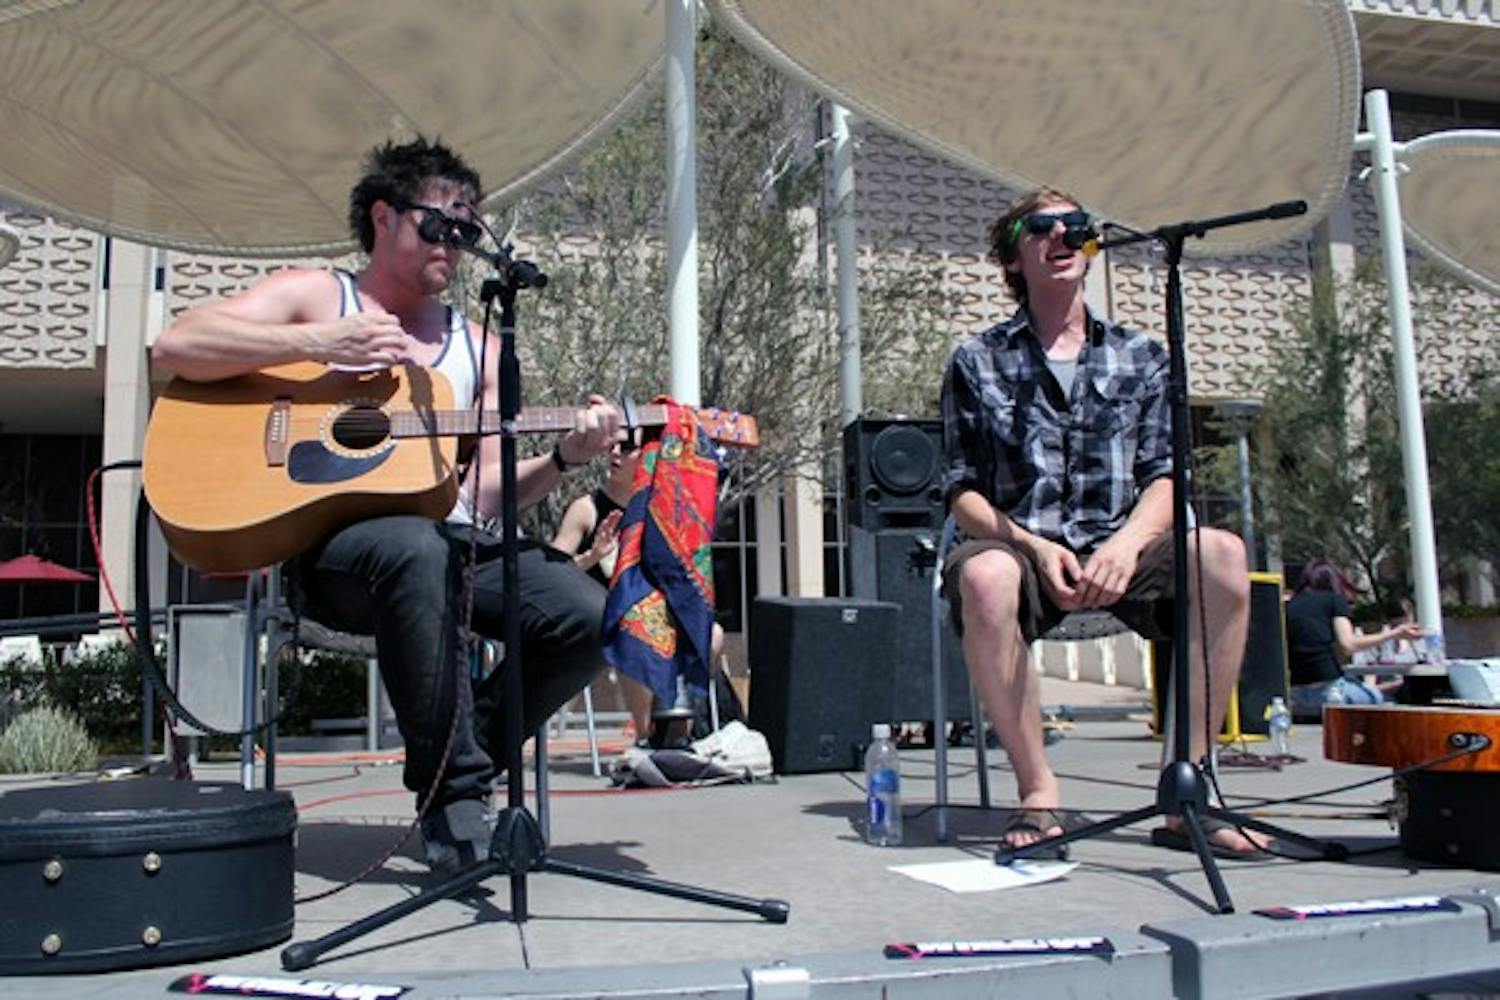 The band, While We're Up, performs outside the Memorial Union on the Tempe Campus Tuesday afternoon. (Photo by Marissa Krings)